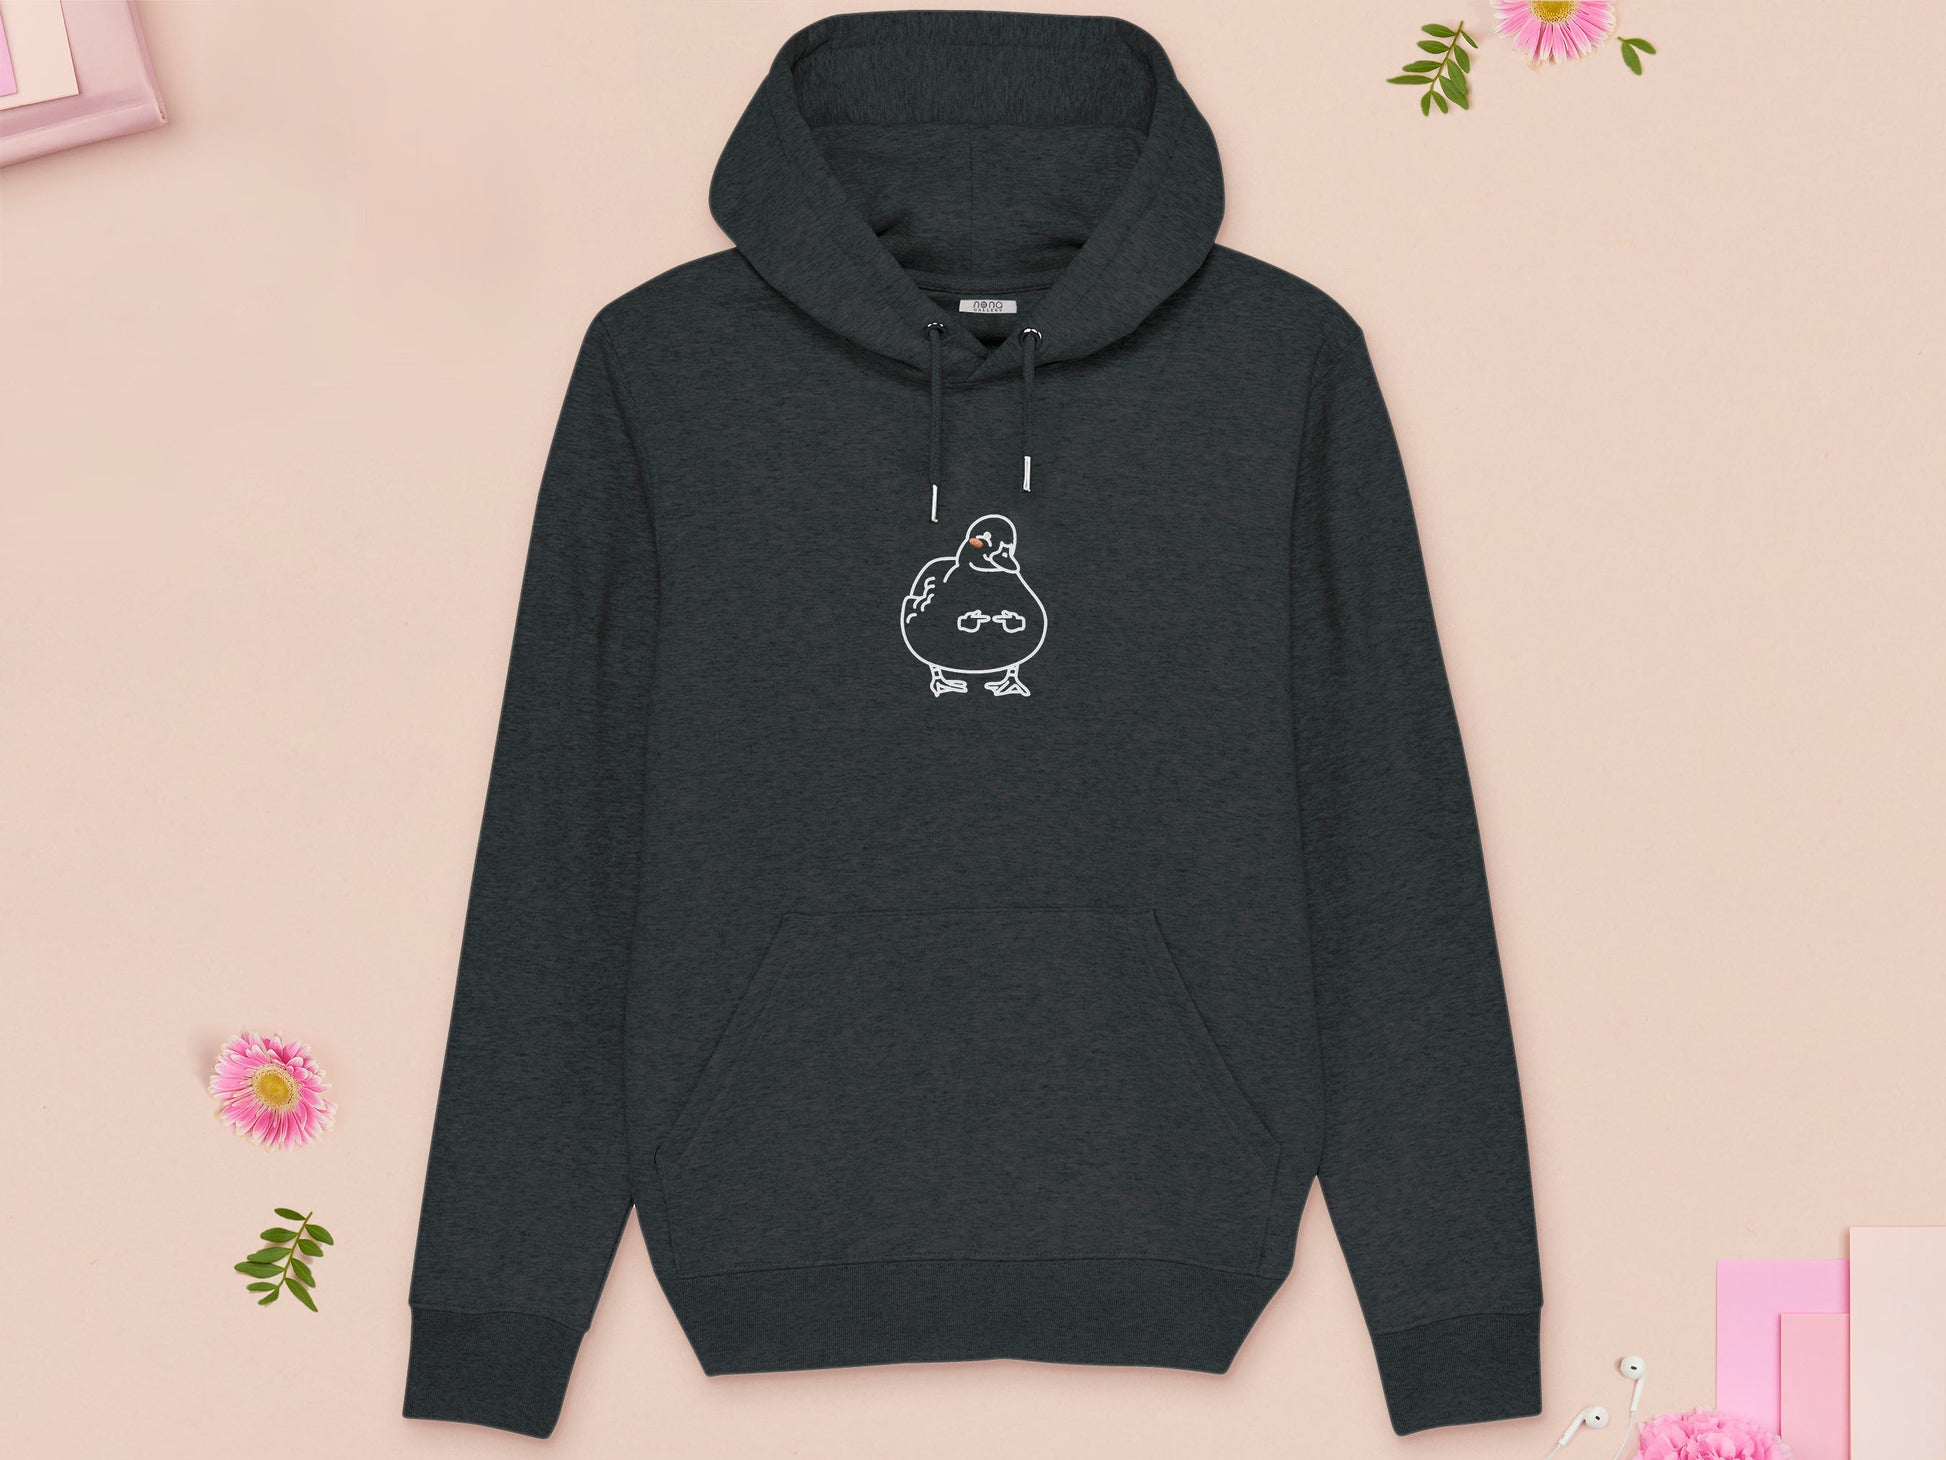 A grey long sleeve fleece hoodie, with an embroidered white thread design of cute blushing duck with the for me finger hand emoji symbols